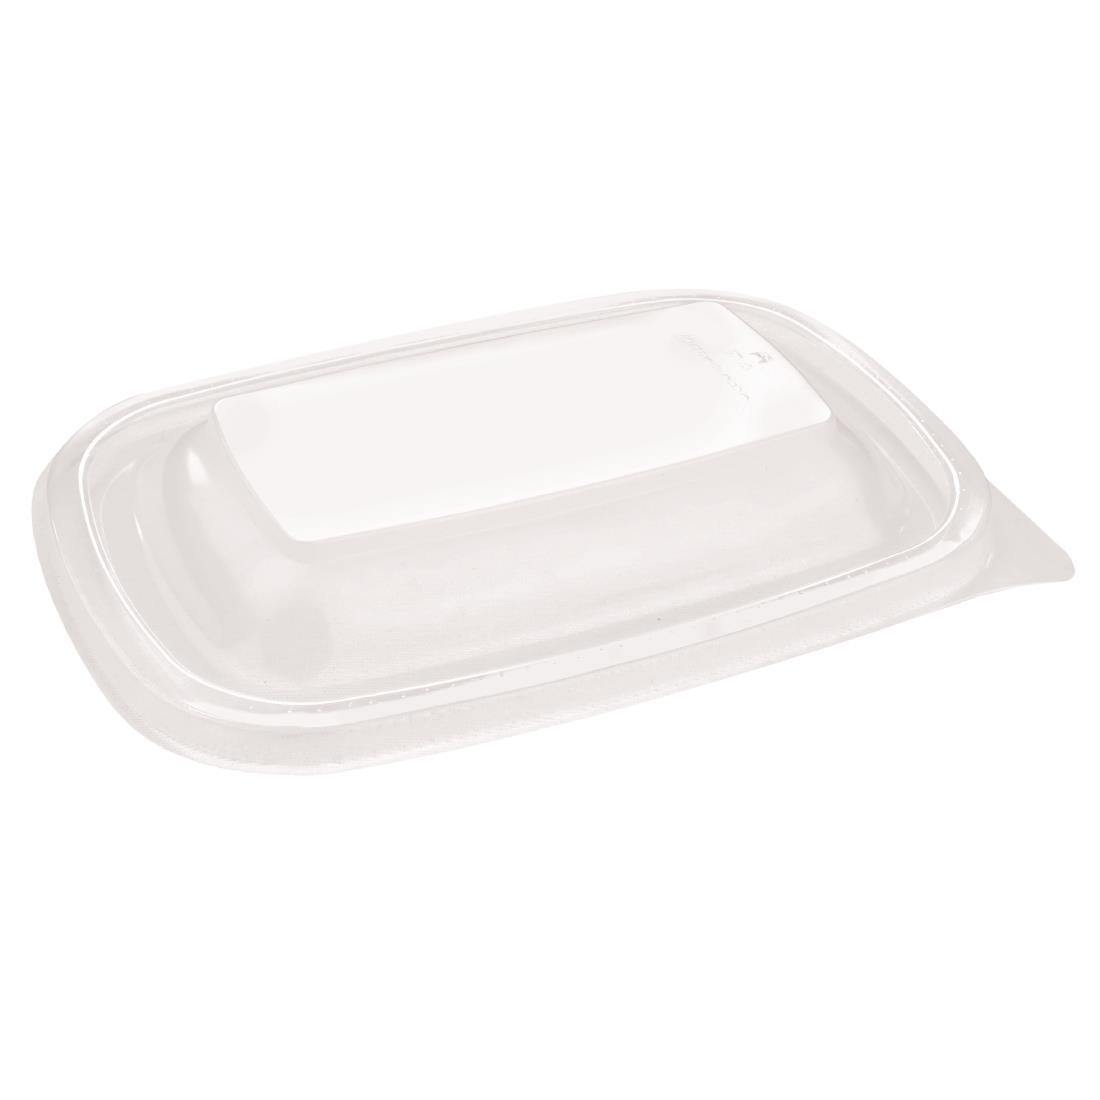 Fastpac Small Rectangular Food Container Lids 500ml / 17oz - DW783  - 1